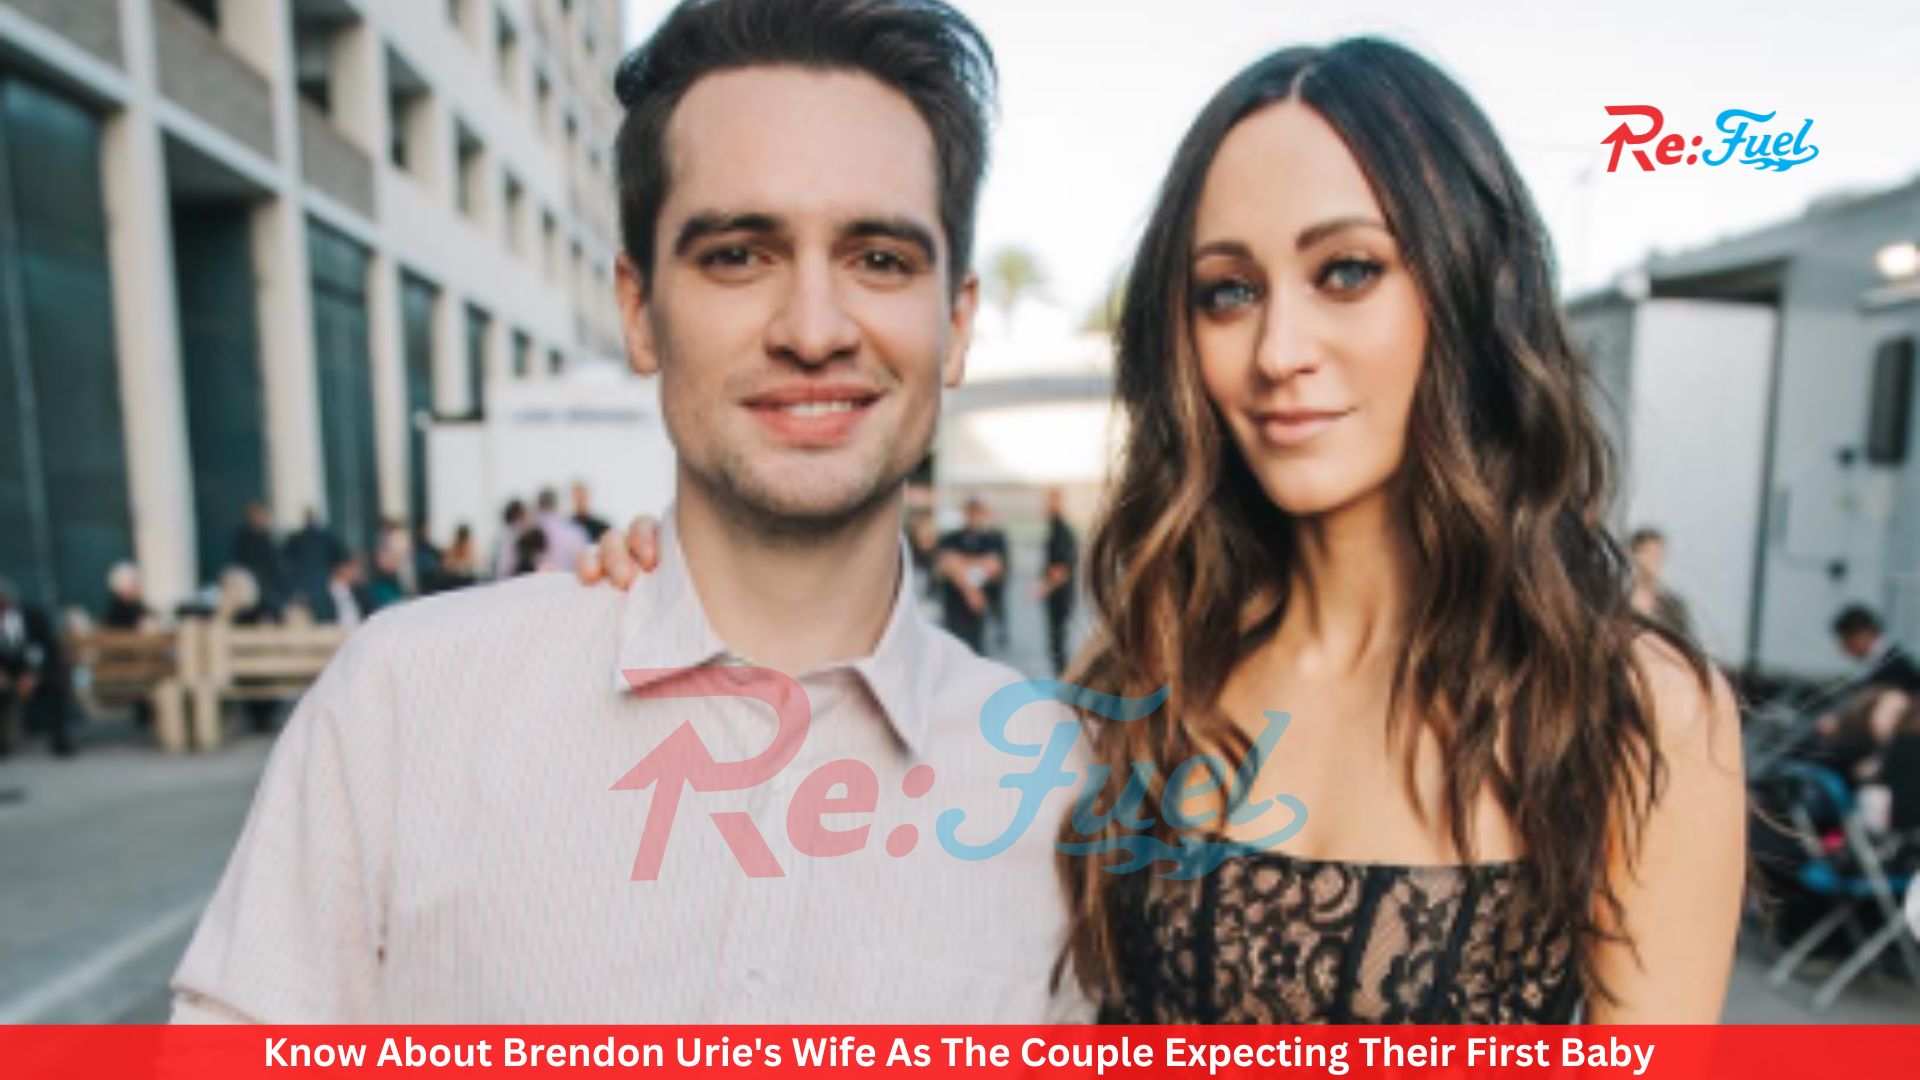 Know About Brendon Urie's Wife As The Couple Expecting Their First Baby